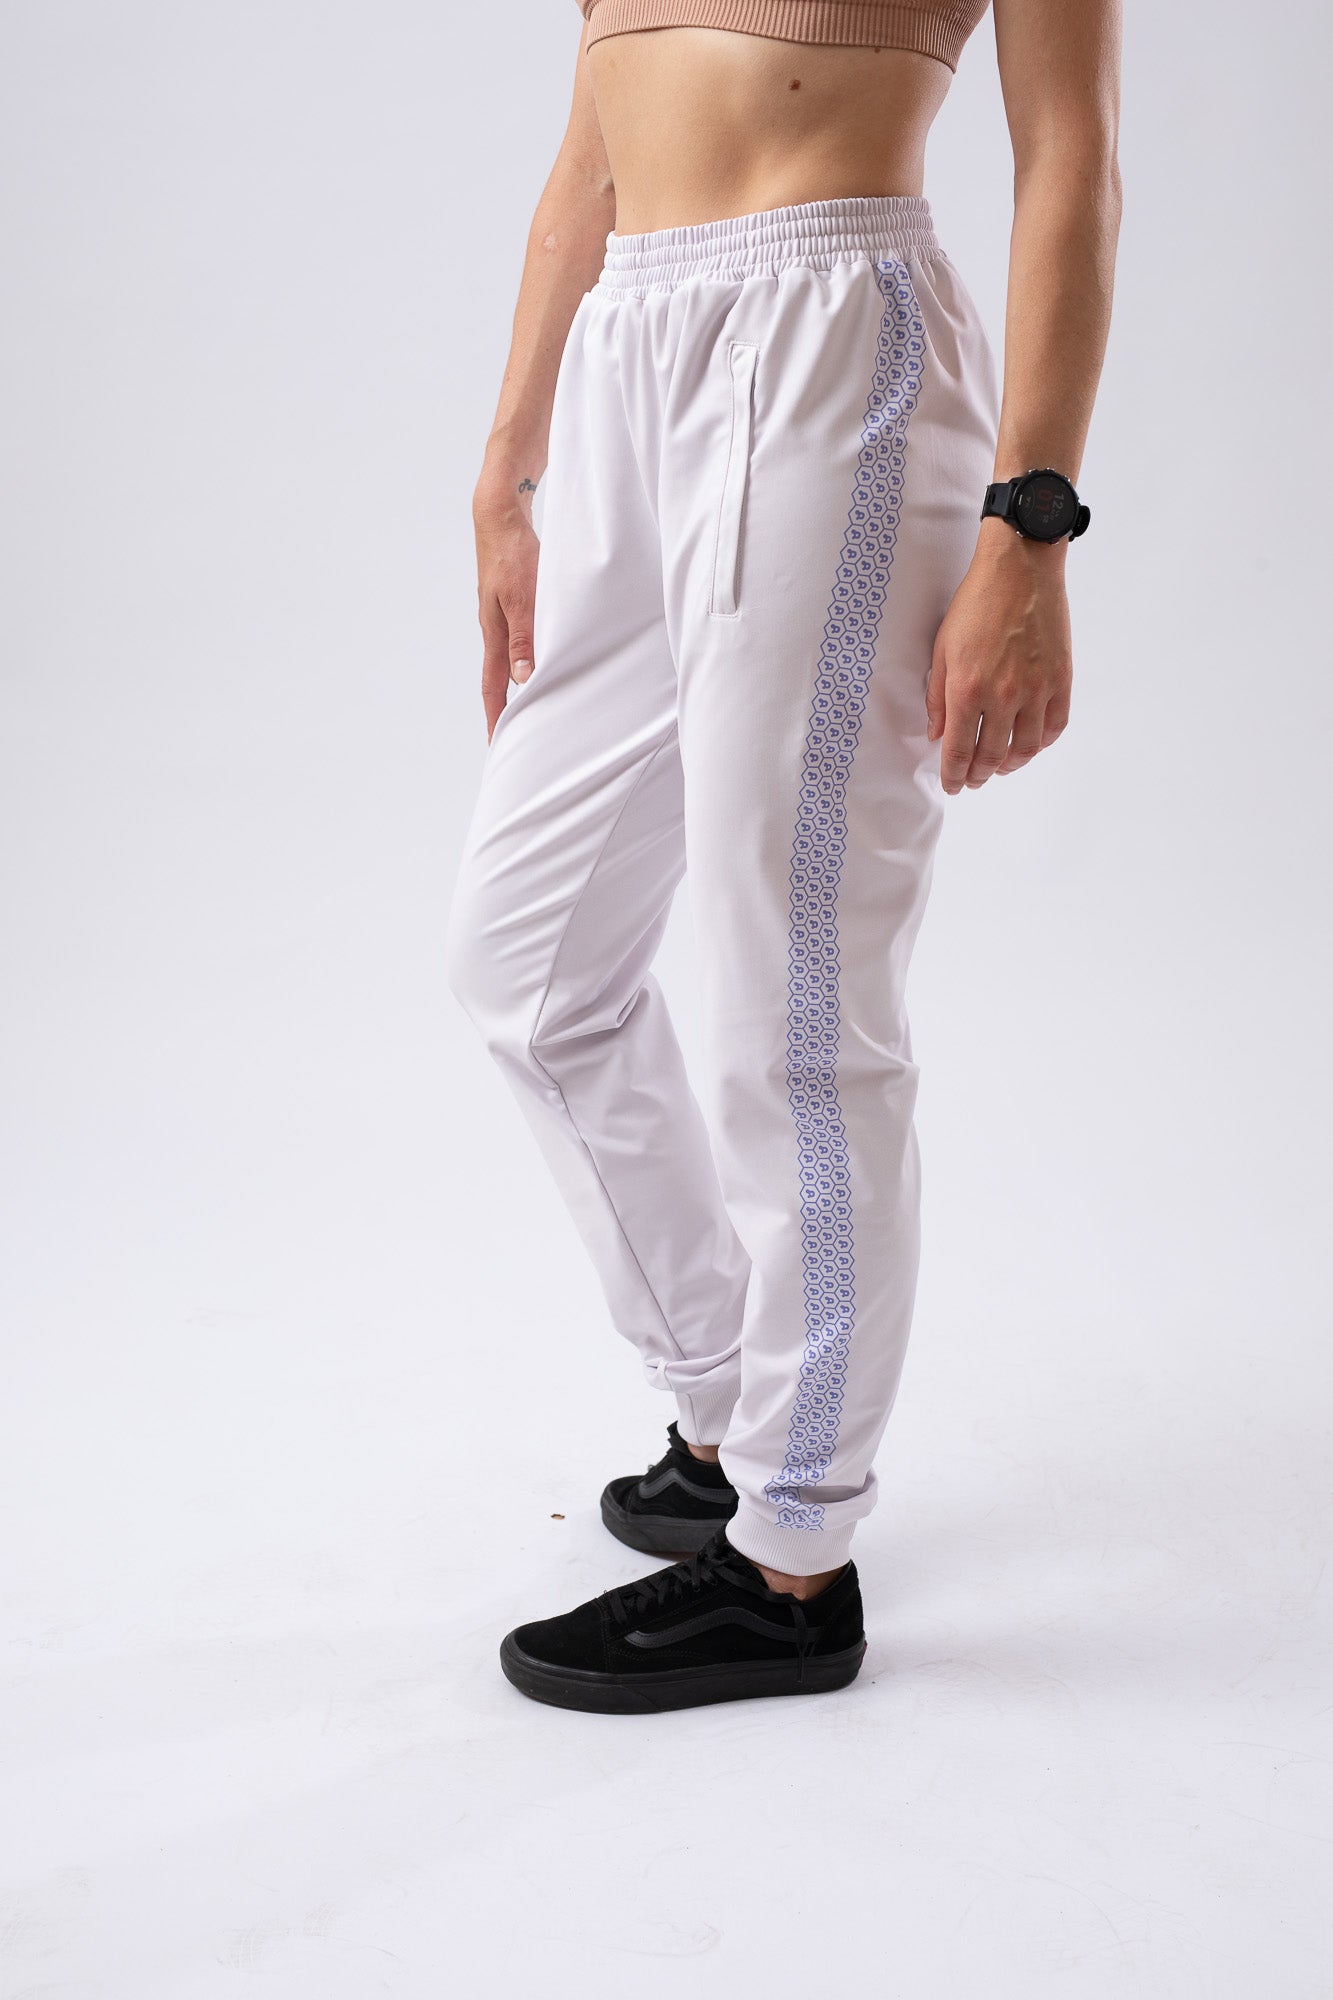 CoreD Pro Tracksuit Pants - Women's - Very Peri Collection